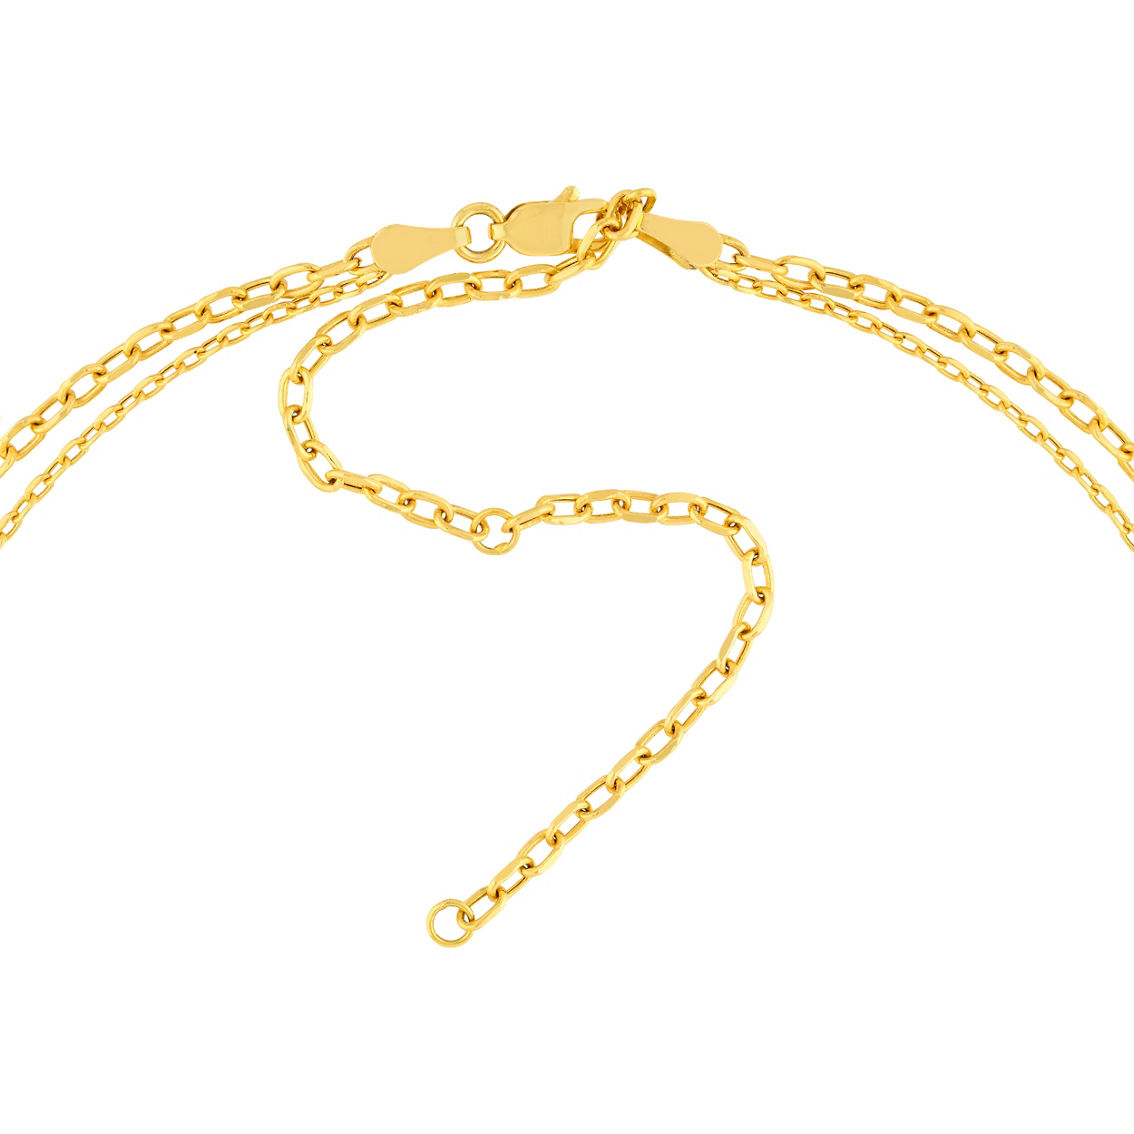 14K Yellow Gold Adjustable Double Chain Necklace - Image 2 of 2